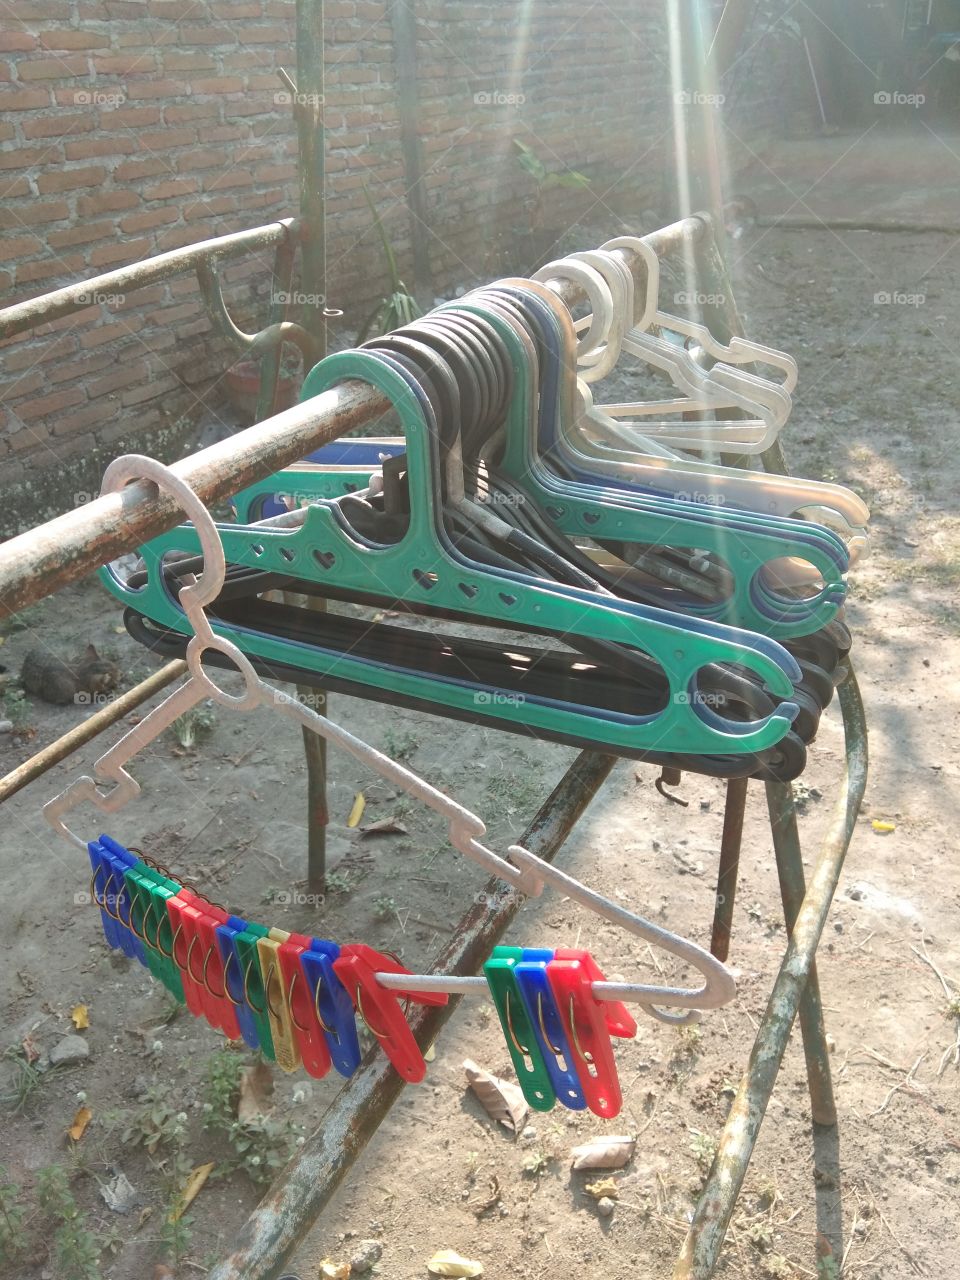 clothes hangers lined up in clotheslines